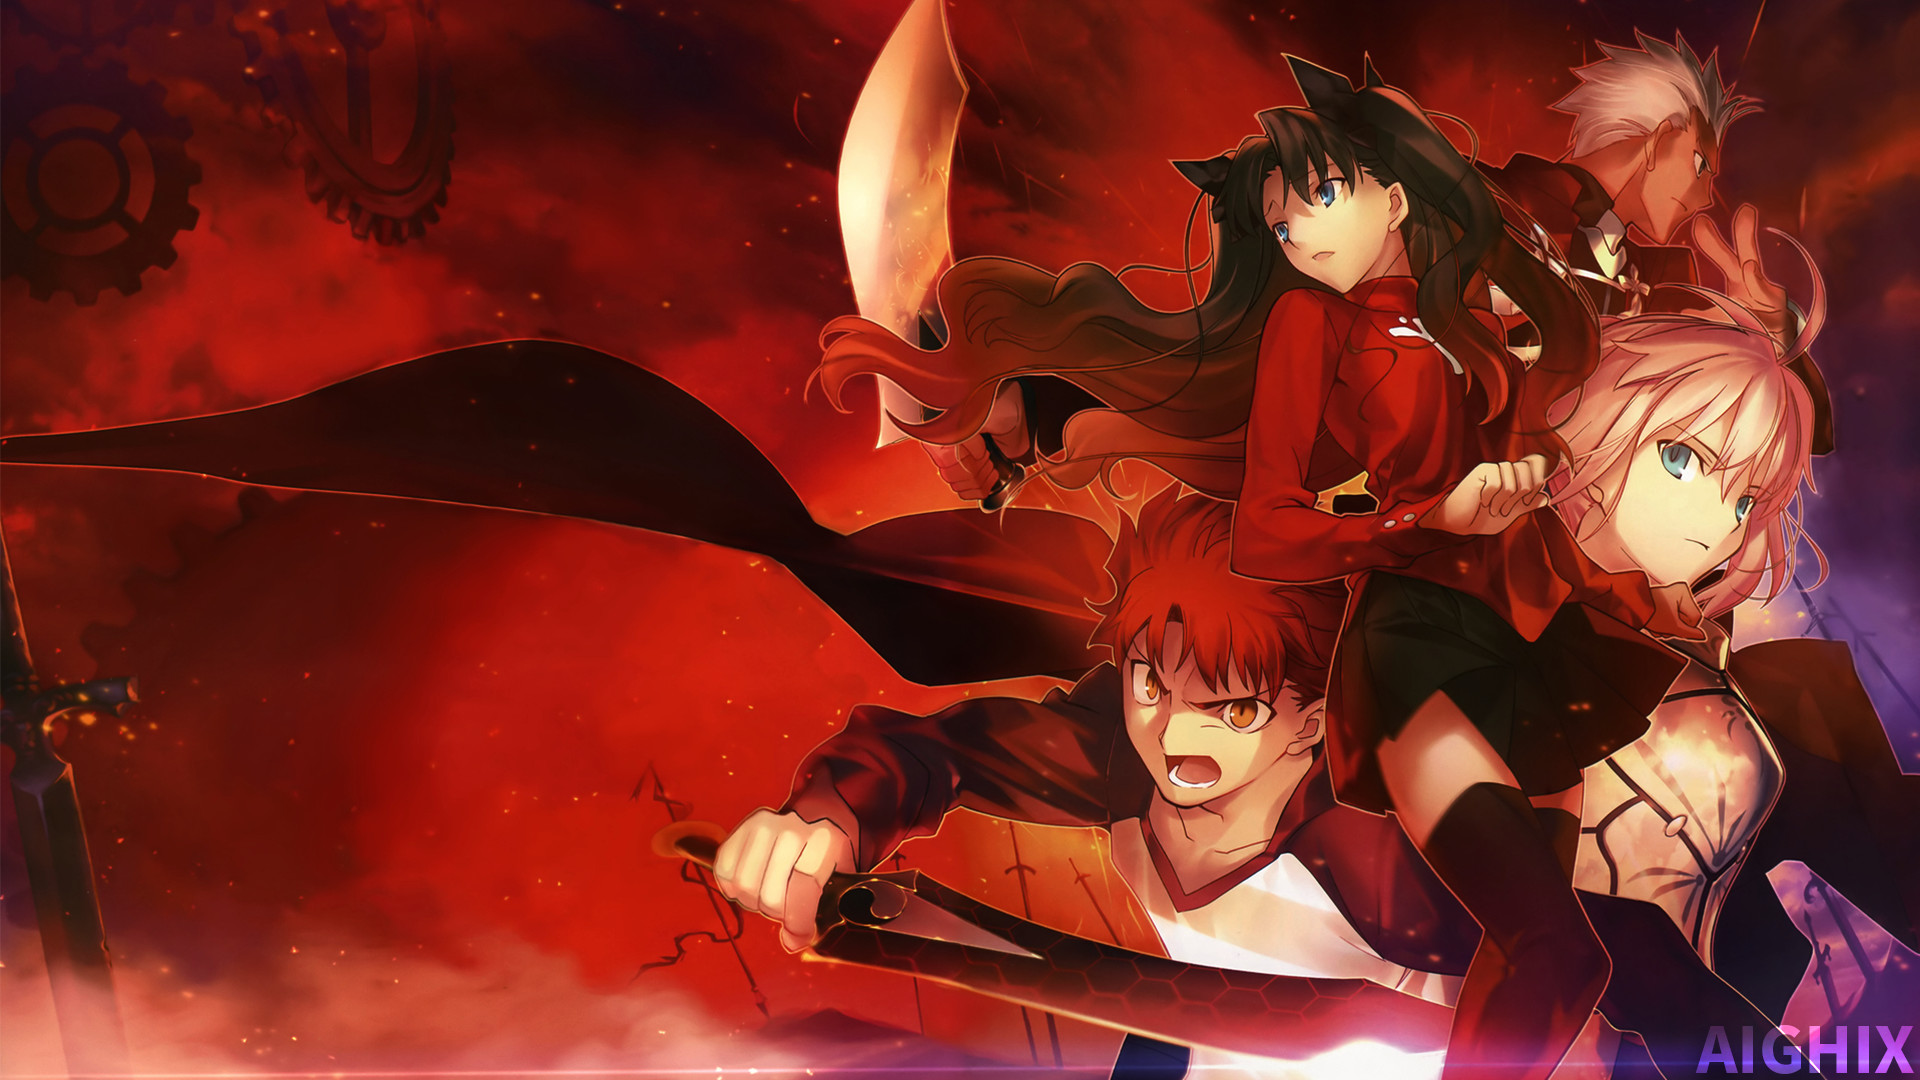 1920x1080 ... Fate stay night Unlimited Blade Works Wallpaper by AIGHIX